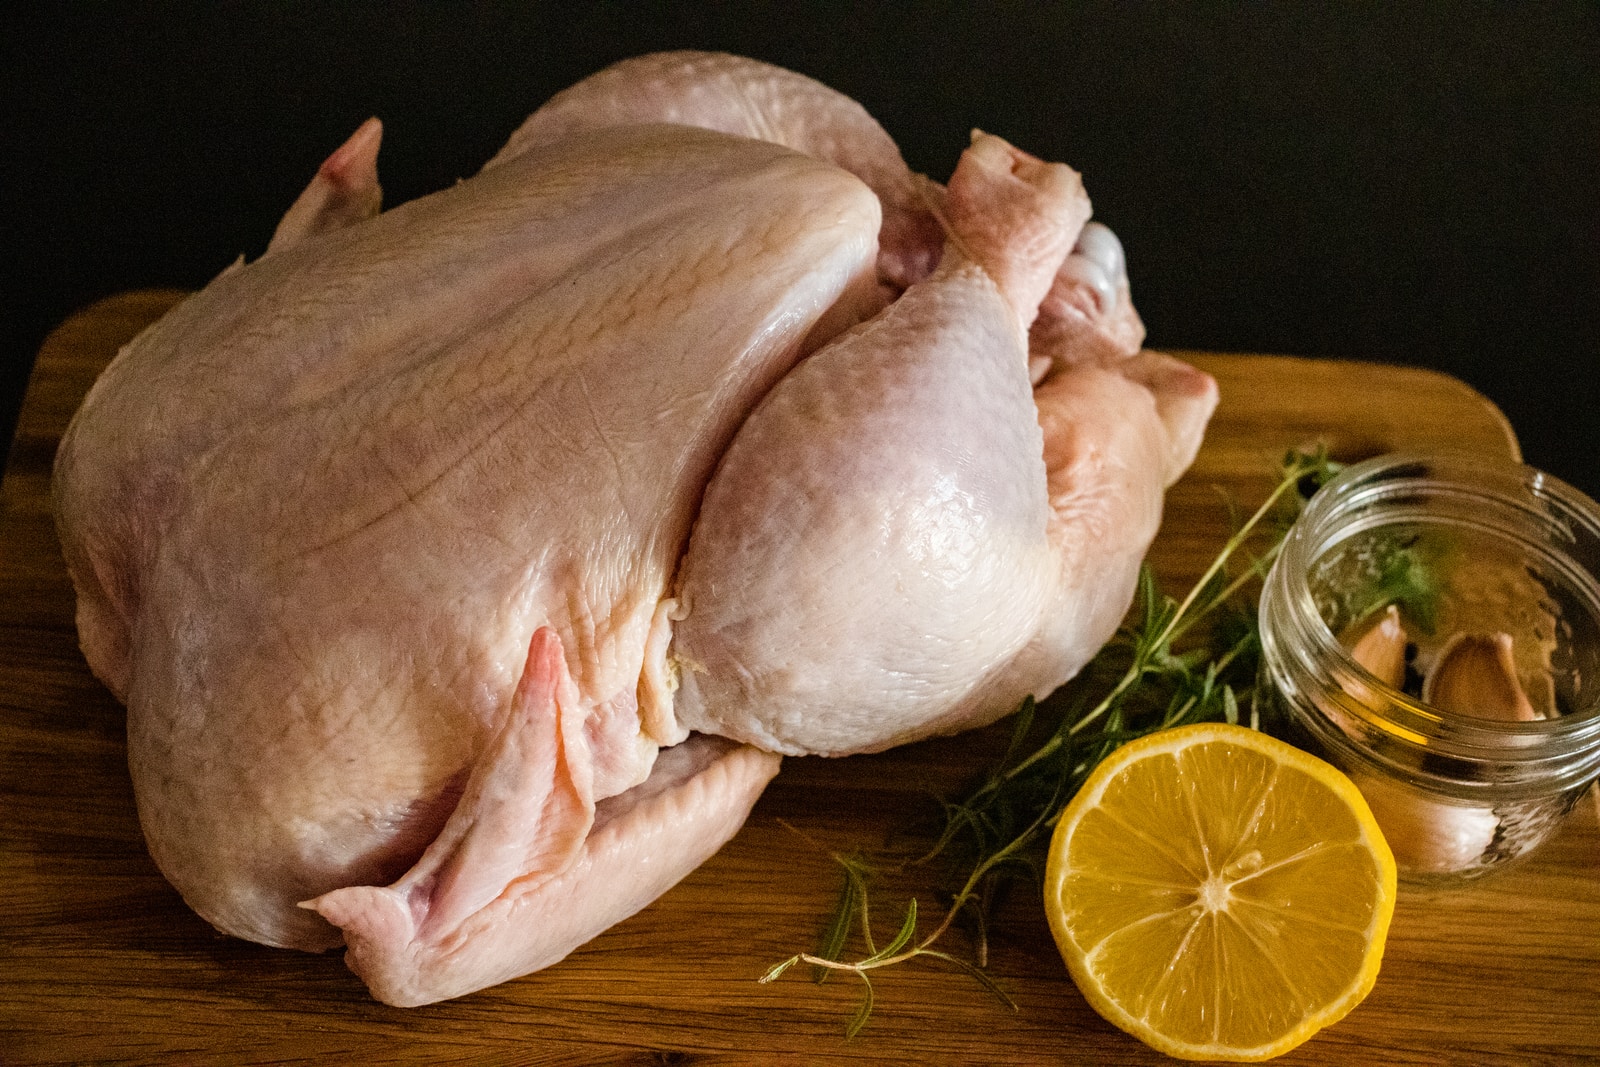 Critical Chicken Meat Shortage Looms in South Africa Amid Avian Influenza Crisis